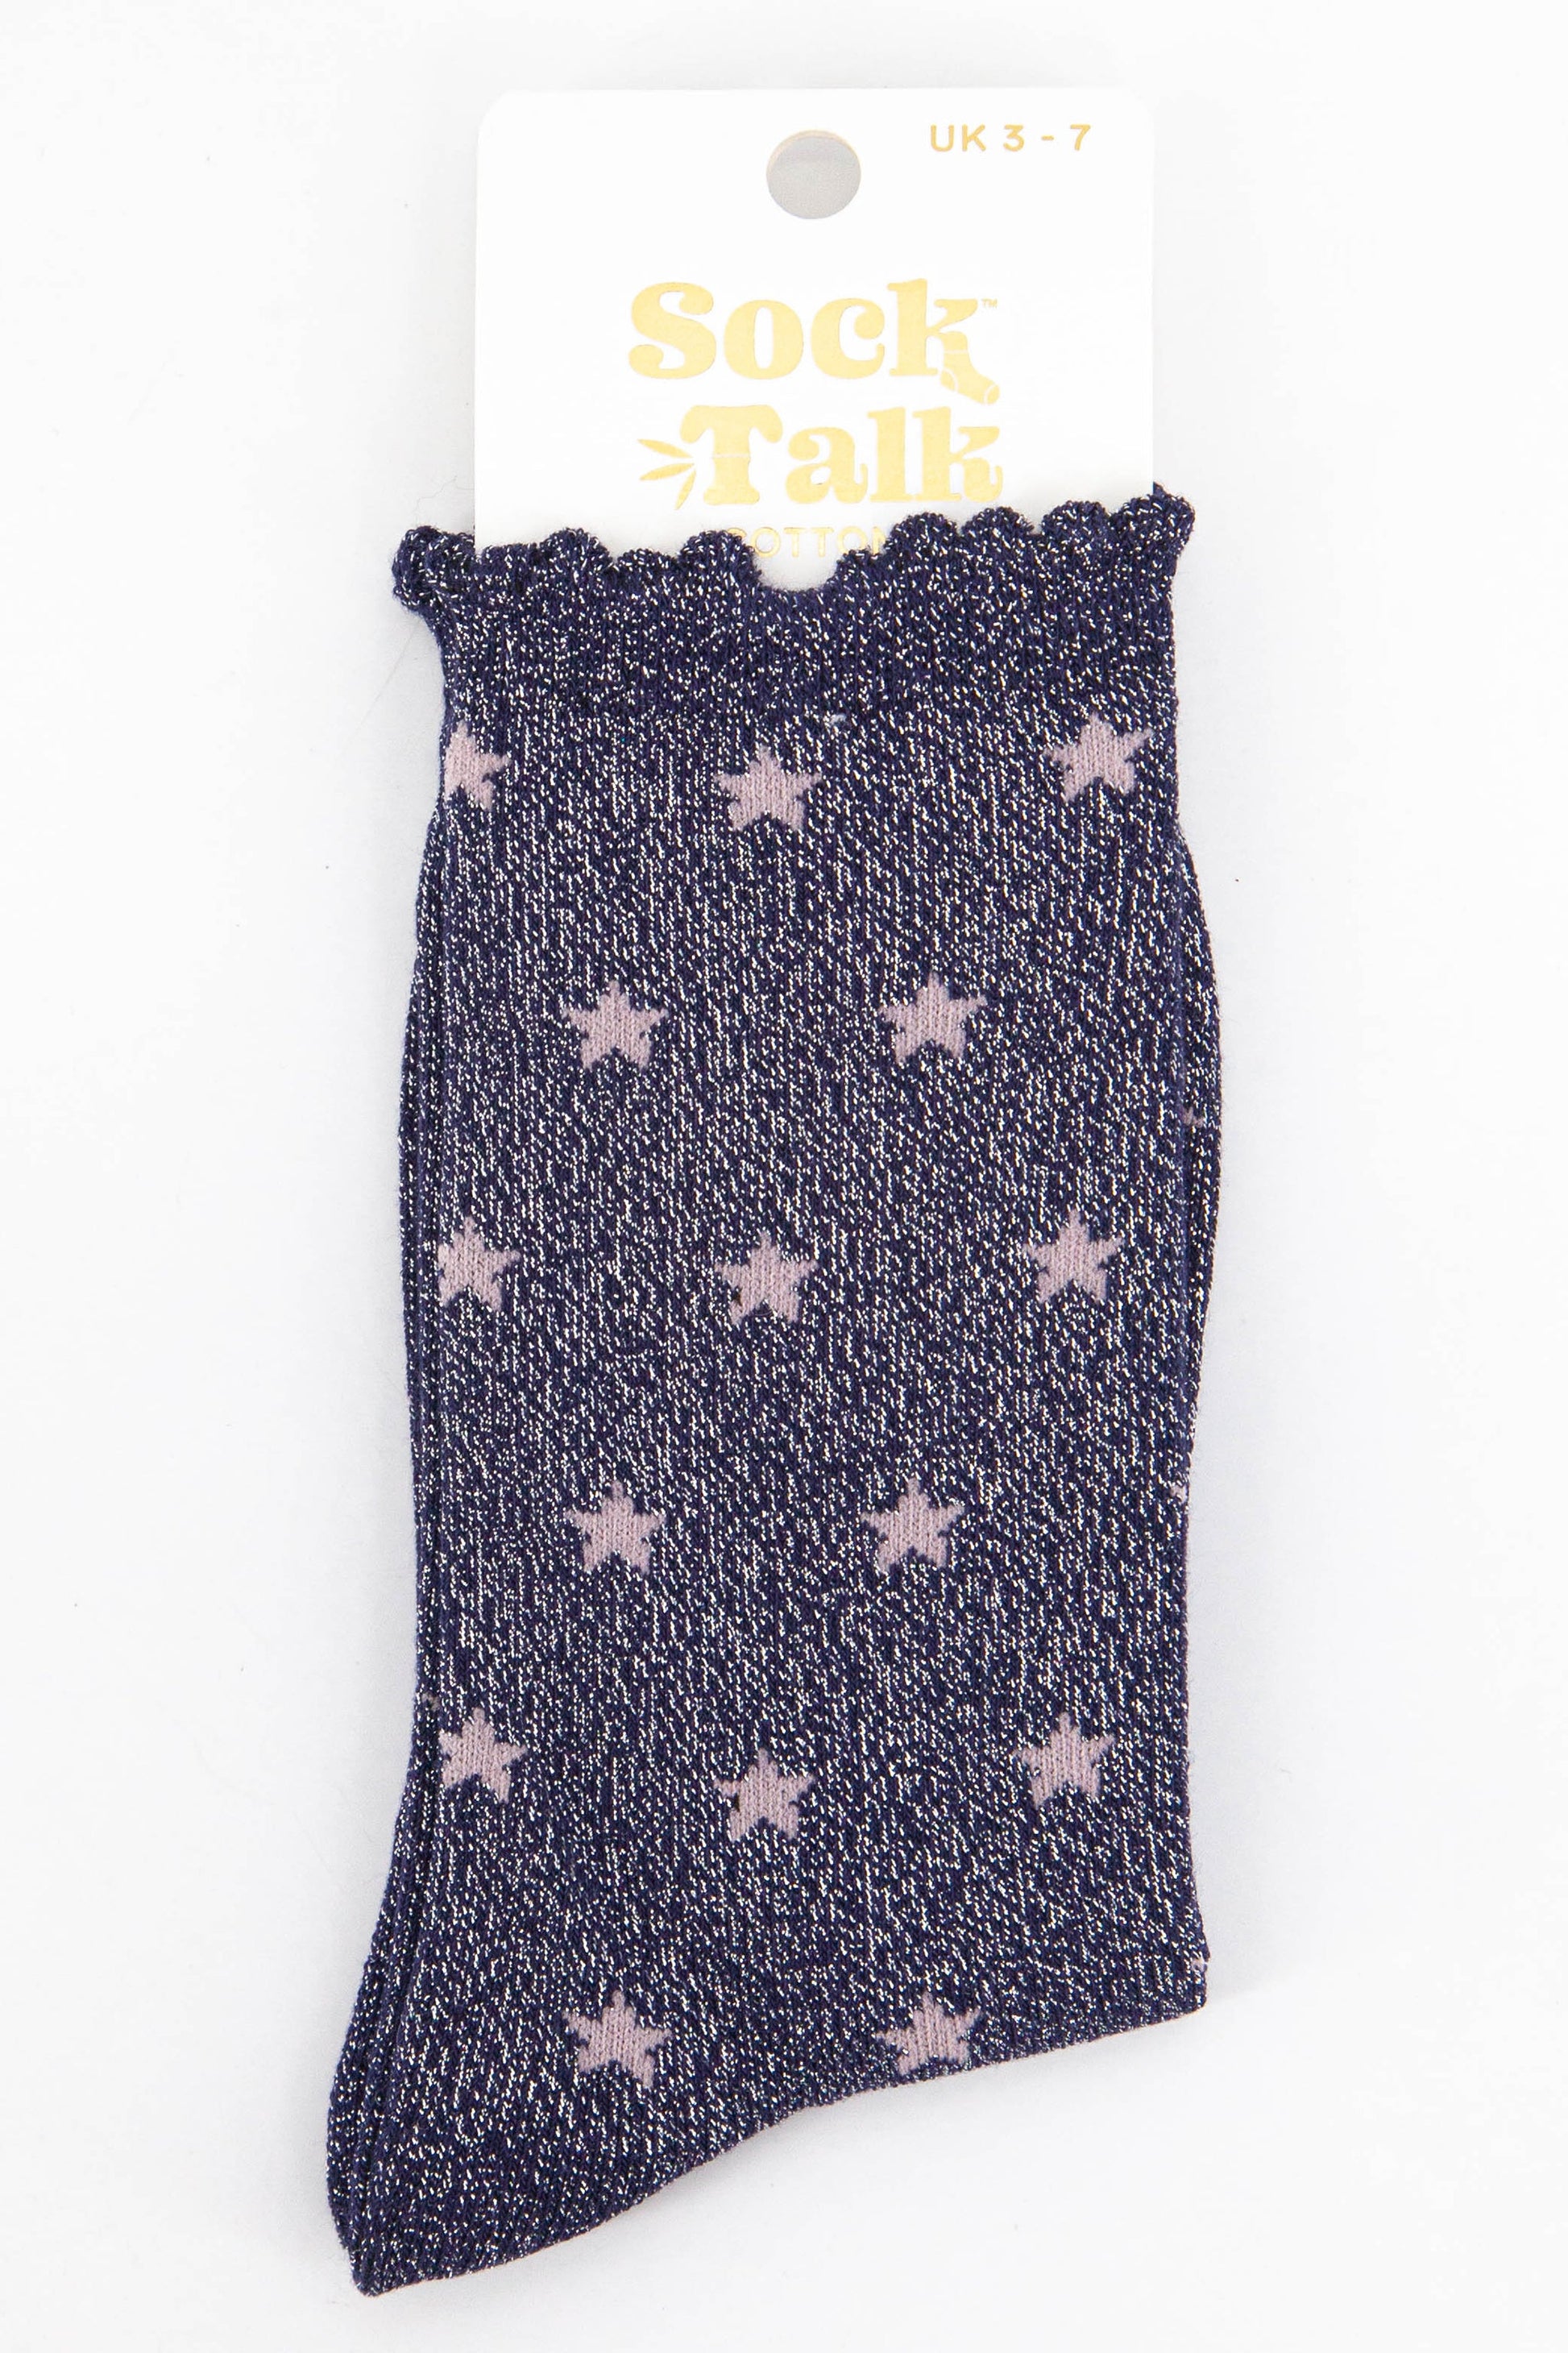 blue and pink sparkly ankle socks uk size 3-7